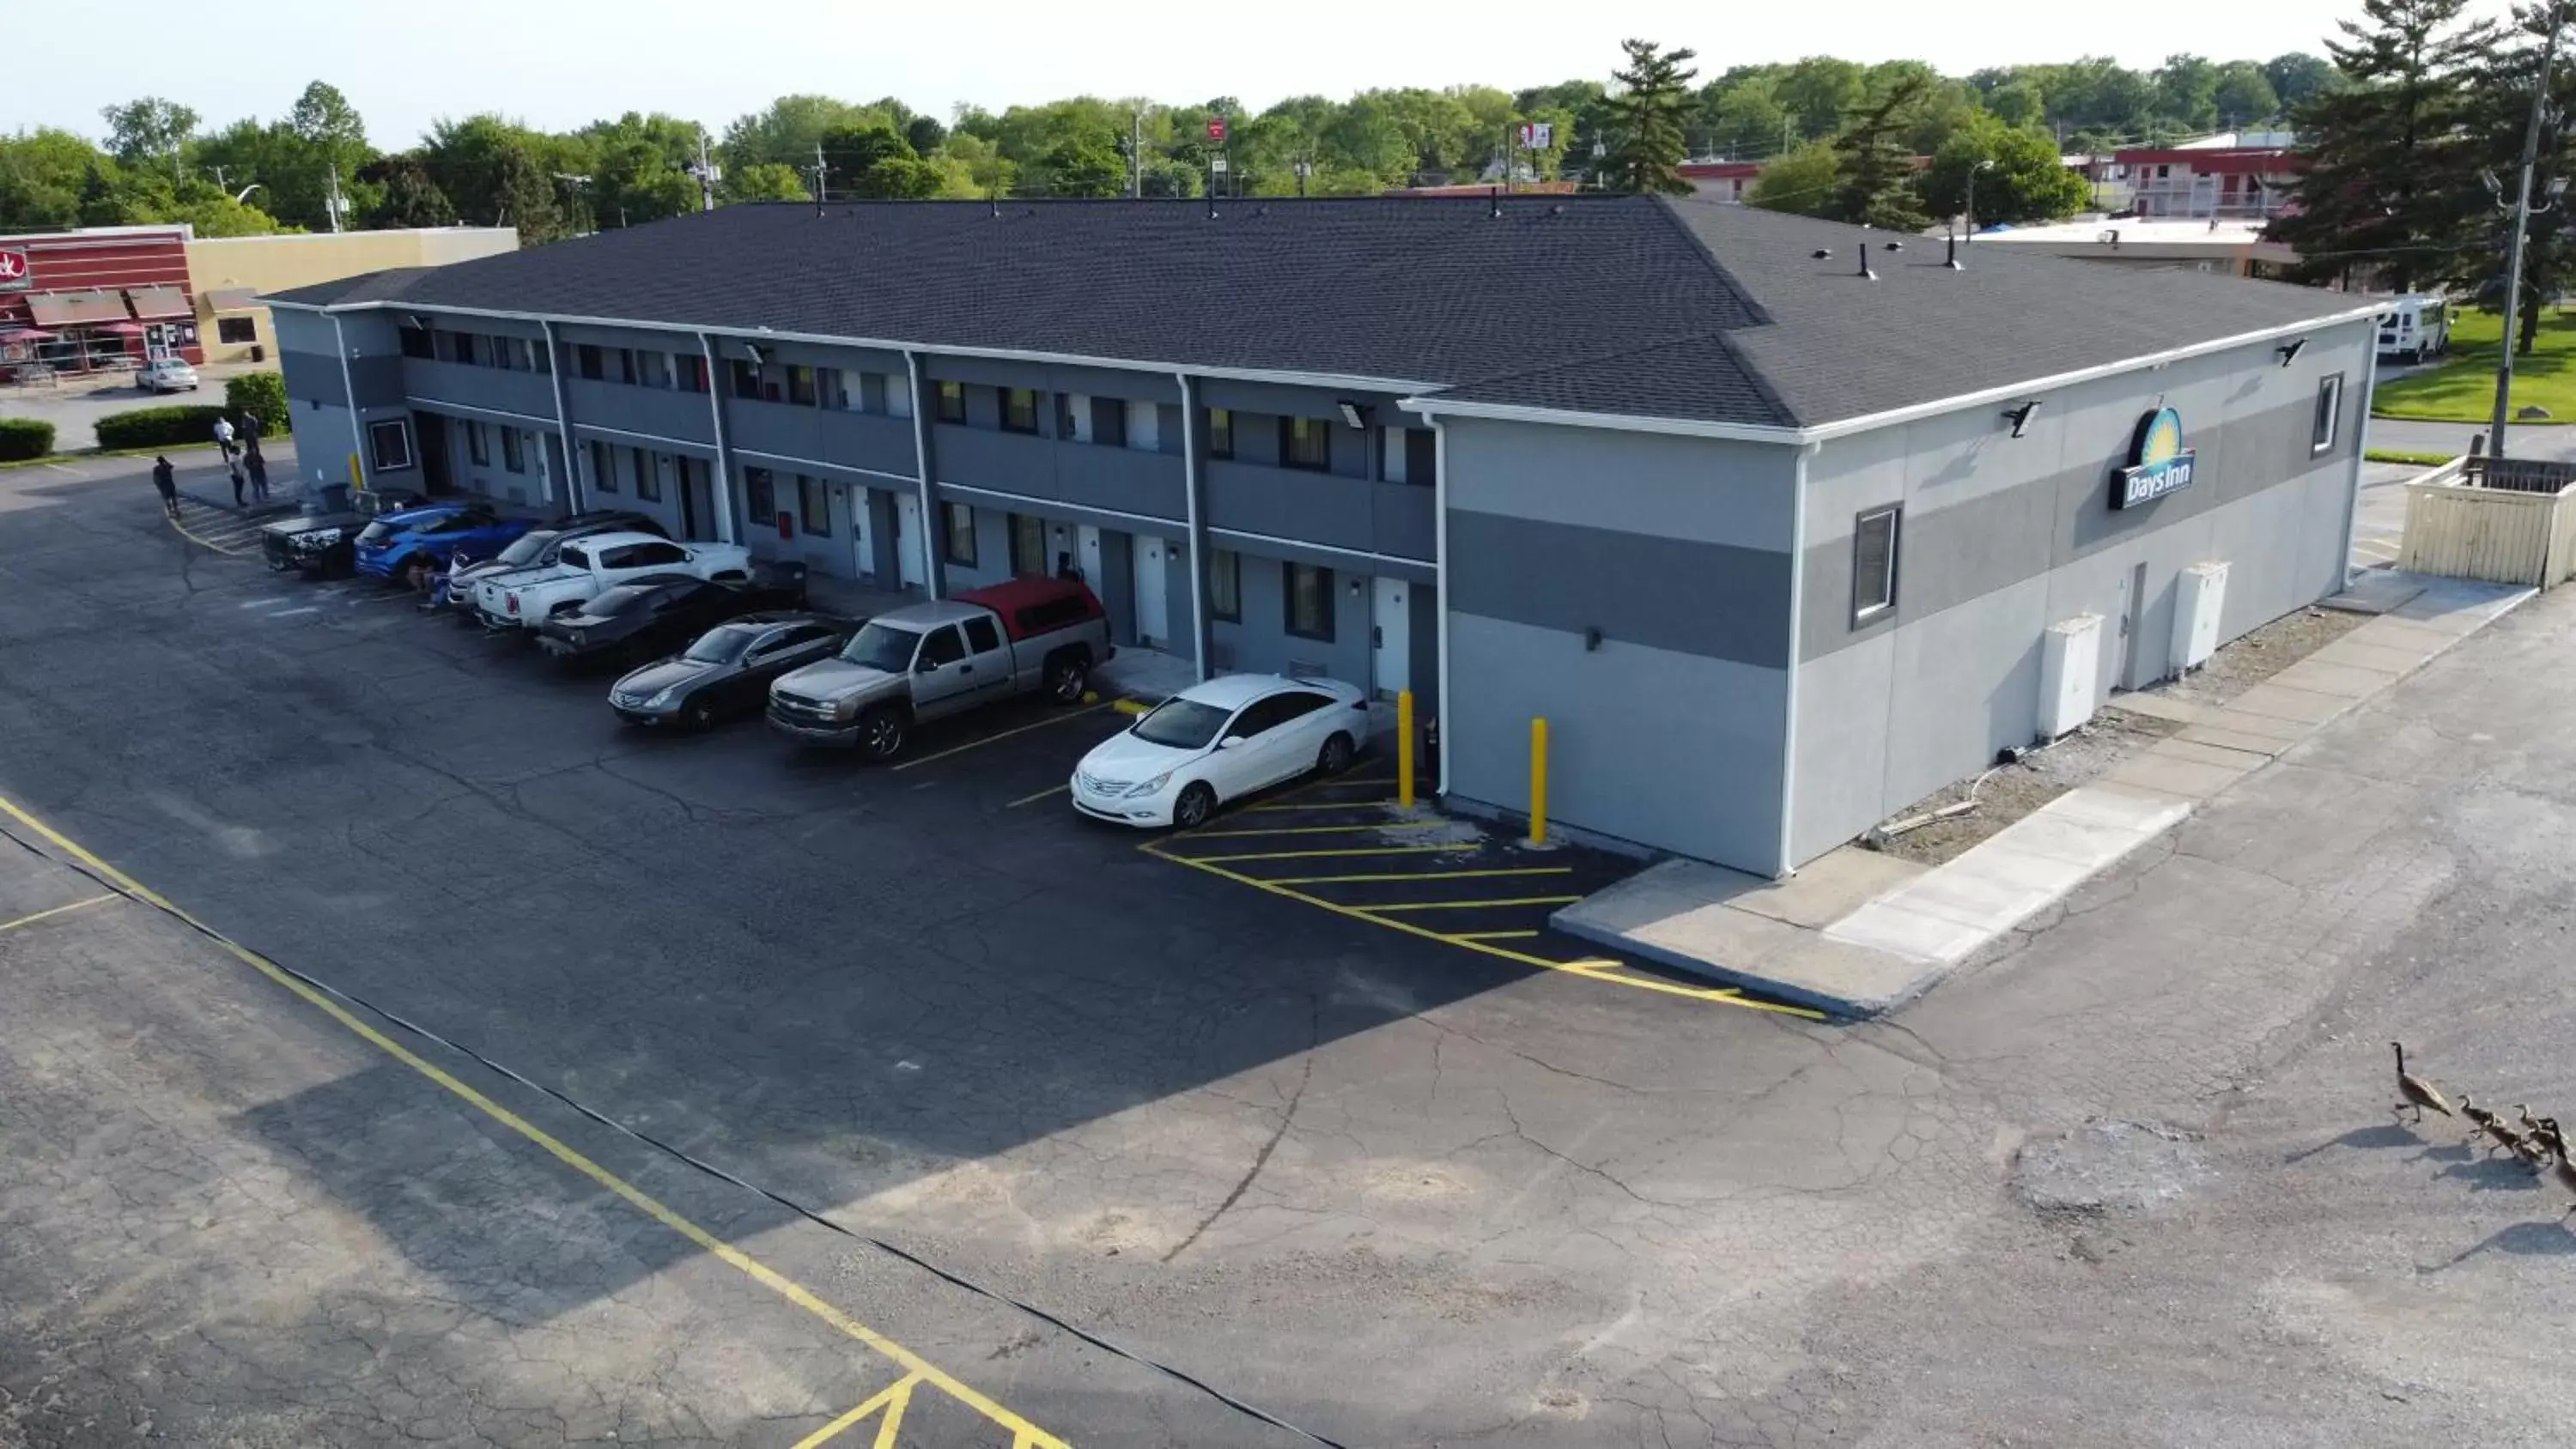 Property building, Bird's-eye View in Days Inn by Wyndham Indianapolis East Post Road